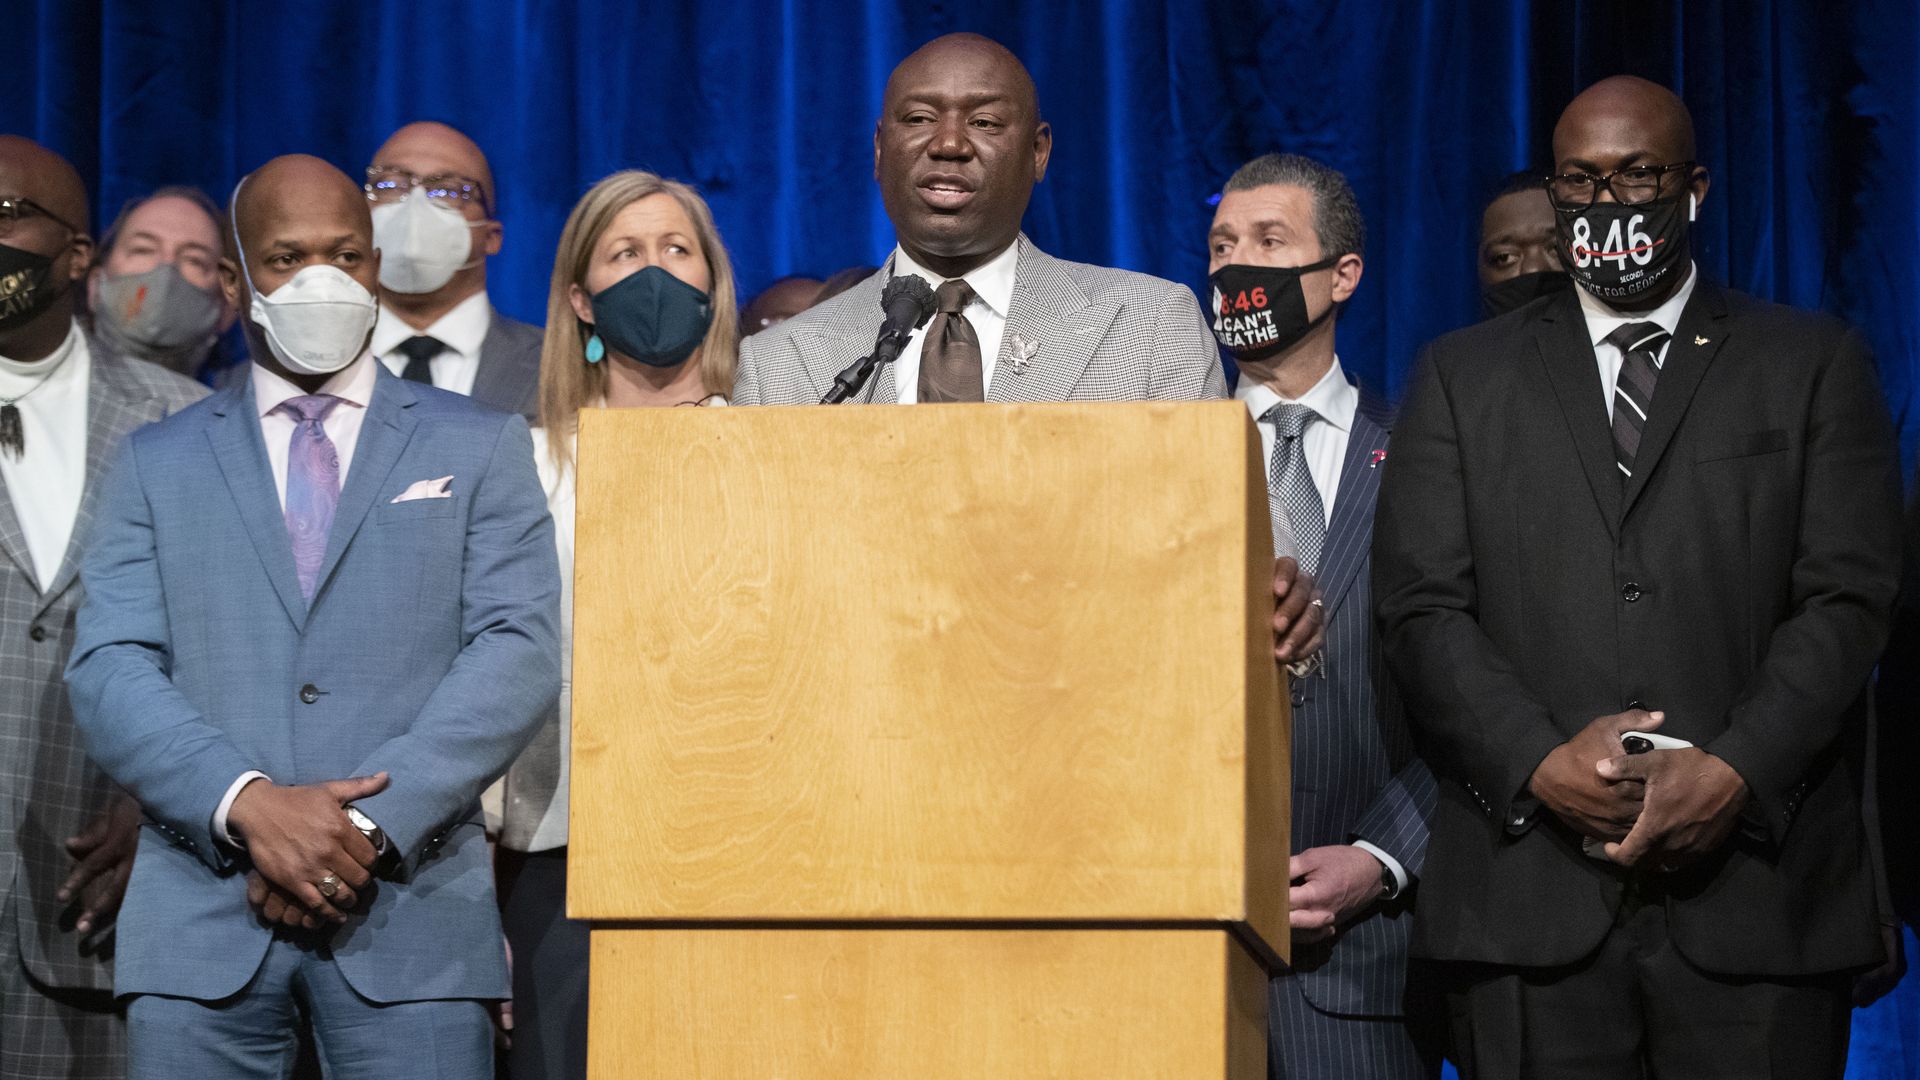 A group of people wearing suits and face masks stands behind a podium 